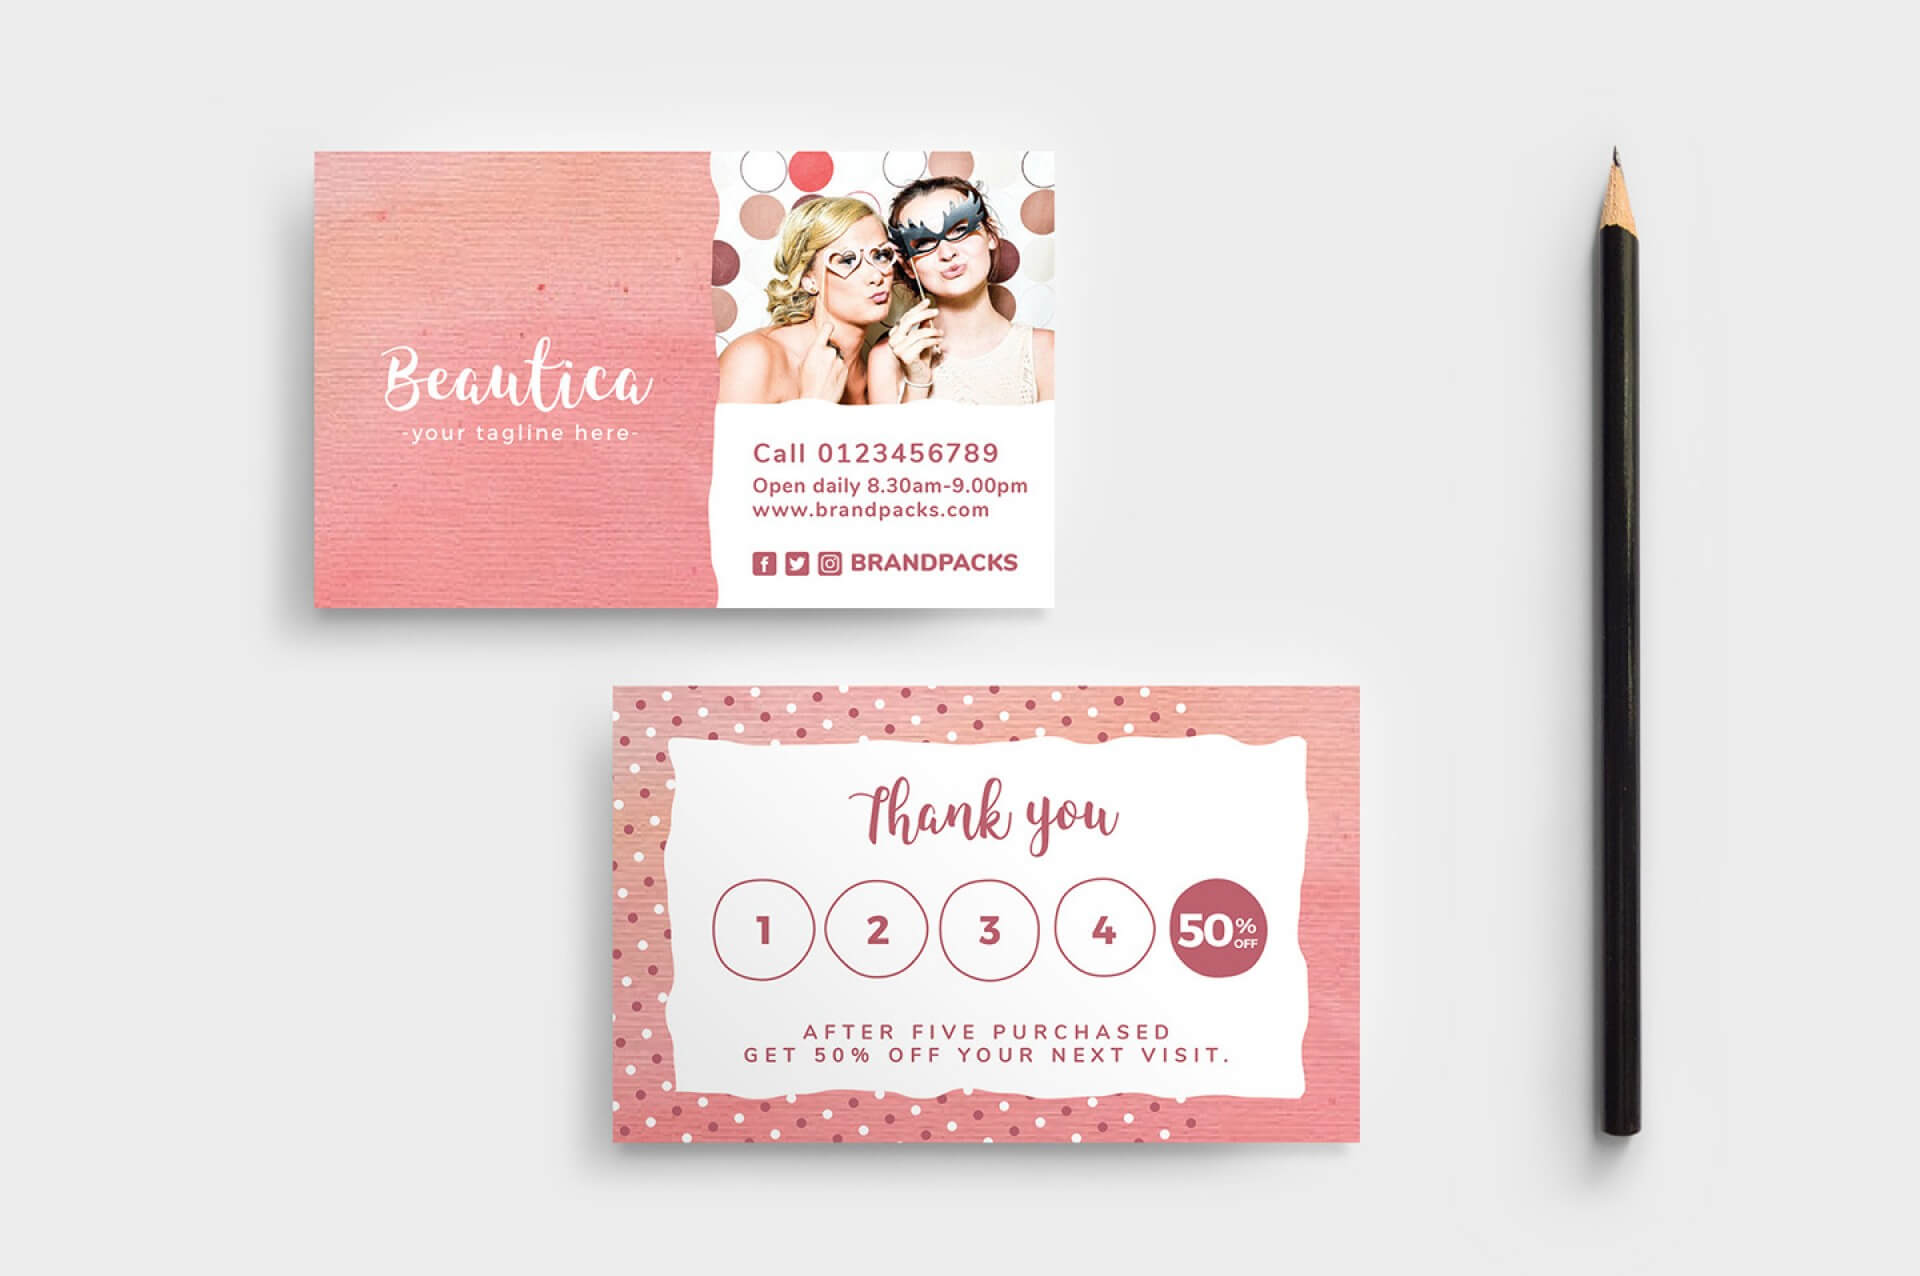 033 Loyalty Card Template Ideas Gift Registry Rare Free Pertaining To Loyalty Card Design Template